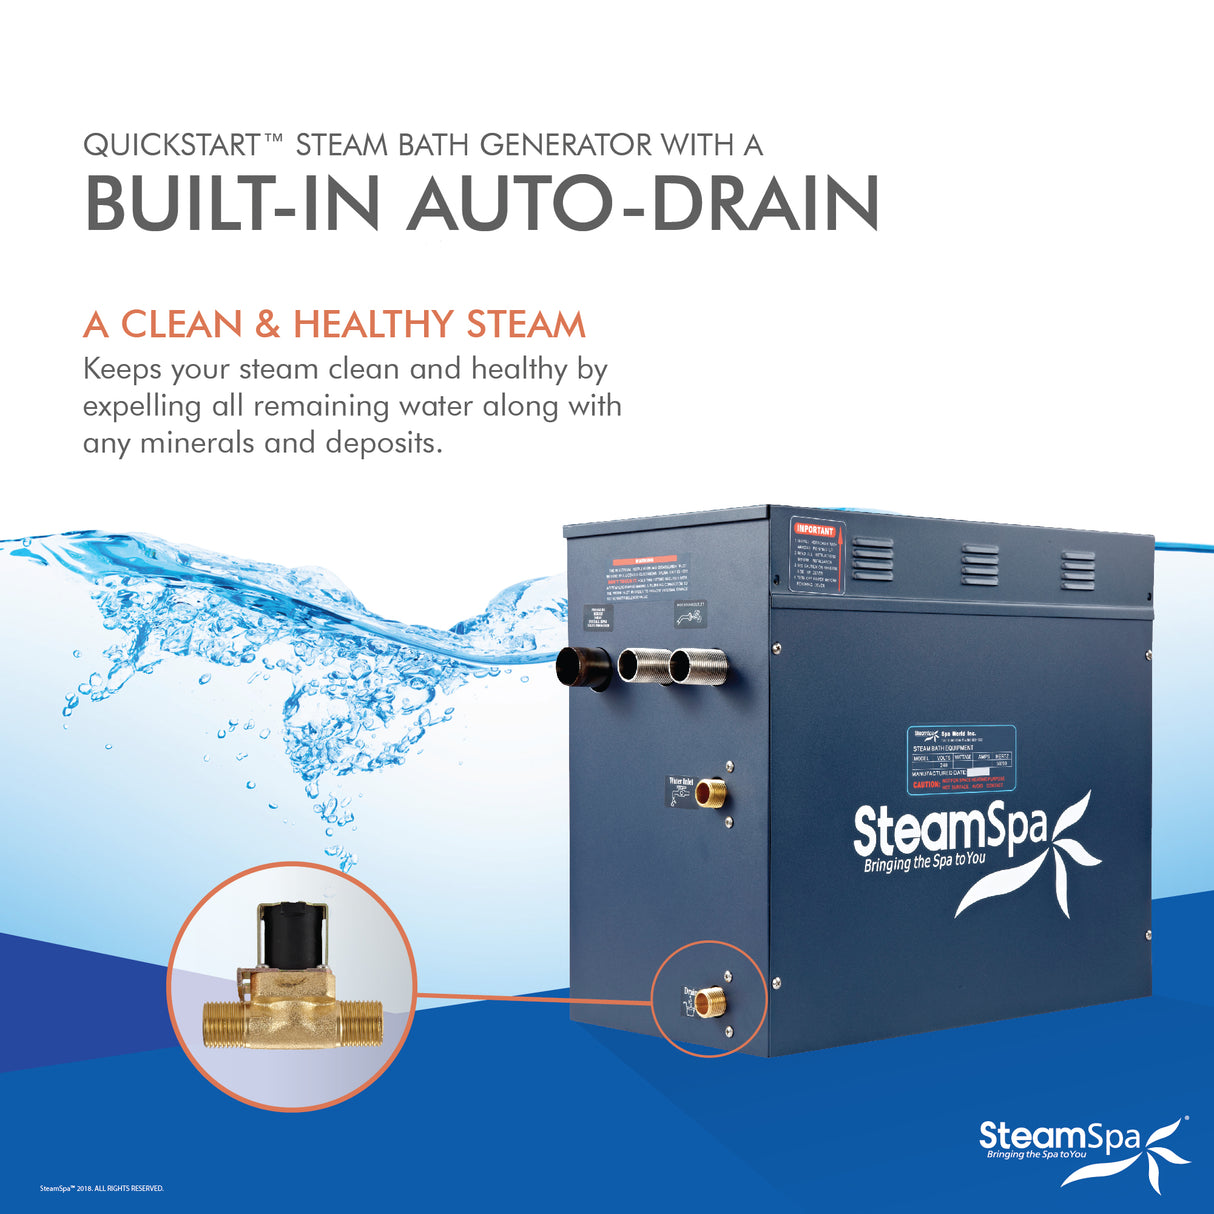 SteamSpa Executive 12 KW QuickStart Acu-Steam Bath Generator Package with Built-in Auto Drain and Install Kit in Gold | Steam Generator Kit with Dual Control Panel Steamhead 240V | SS-EXT1200CH-A SS-EXT1200CH-A